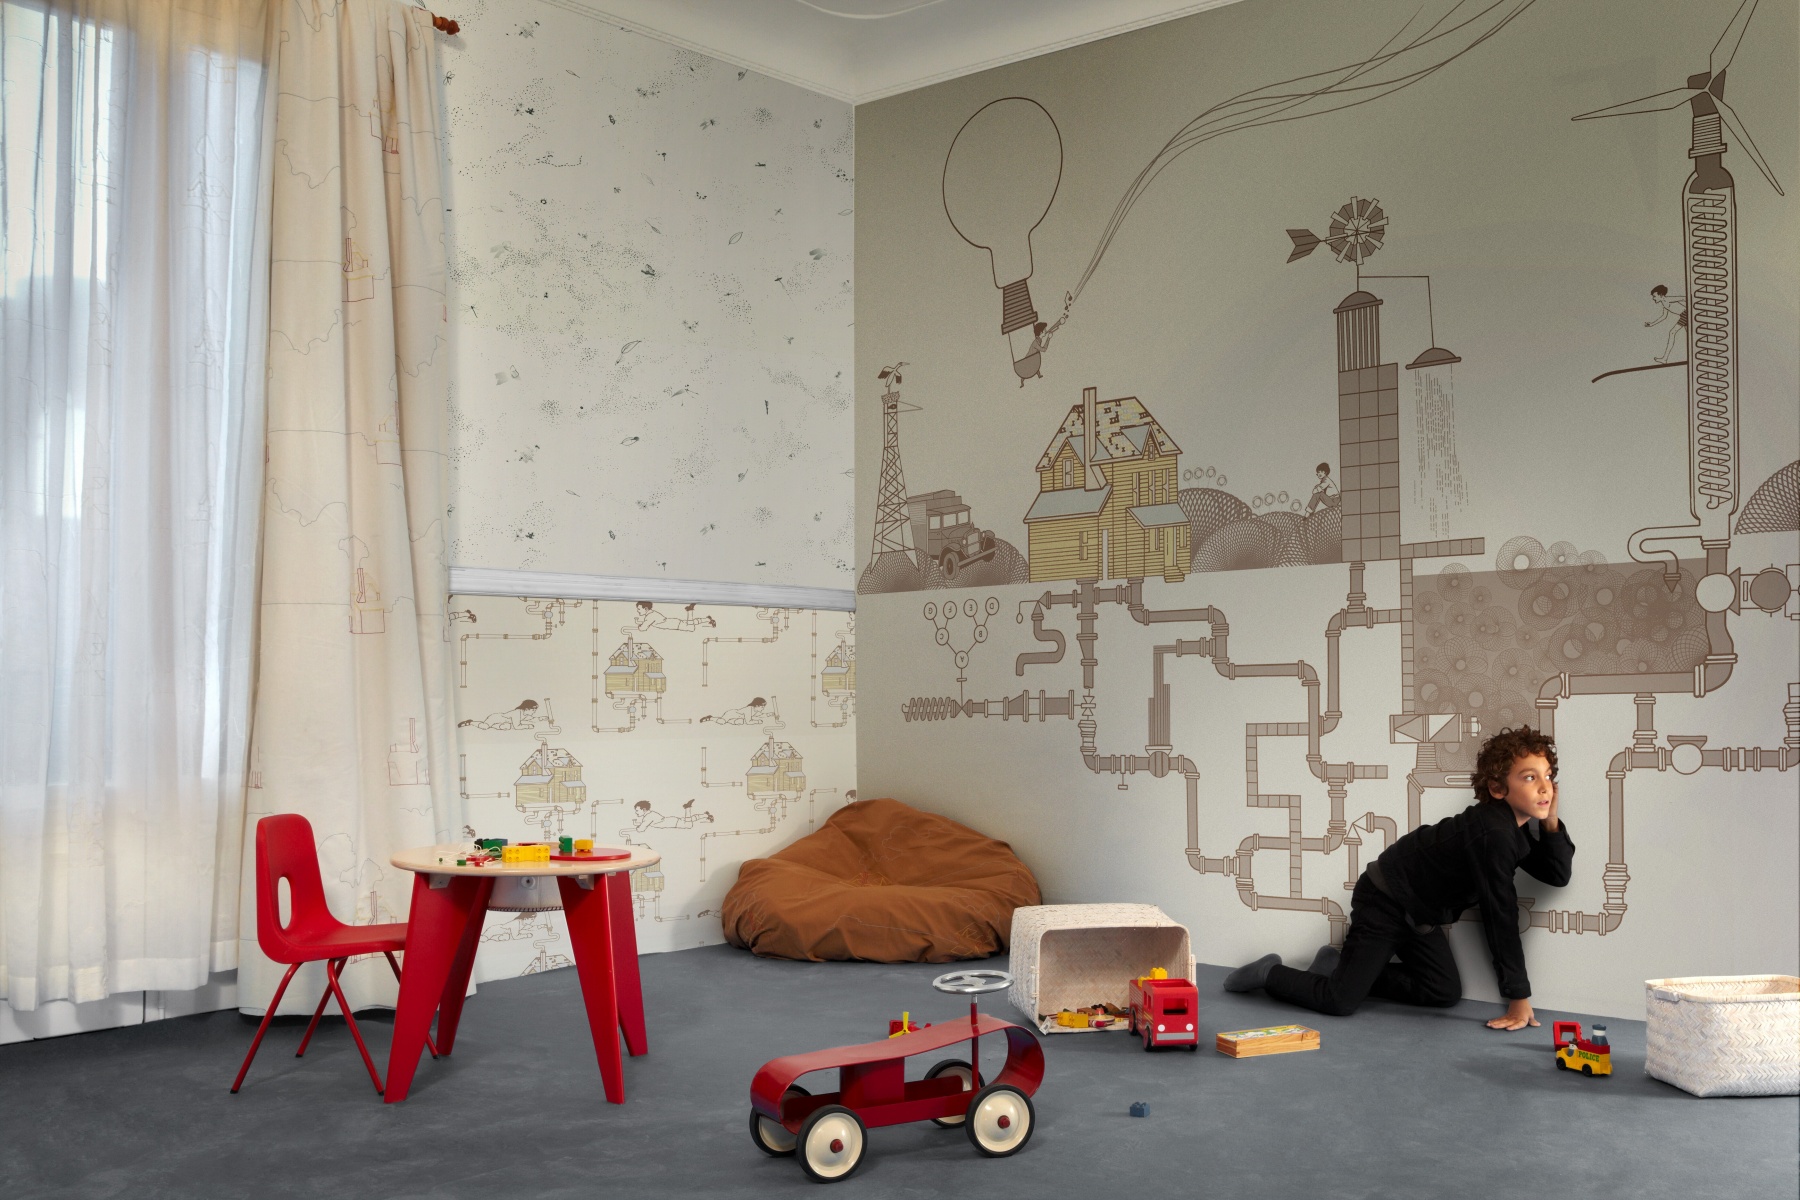 Choosing unusual wallpaper for a child’s room for a boy